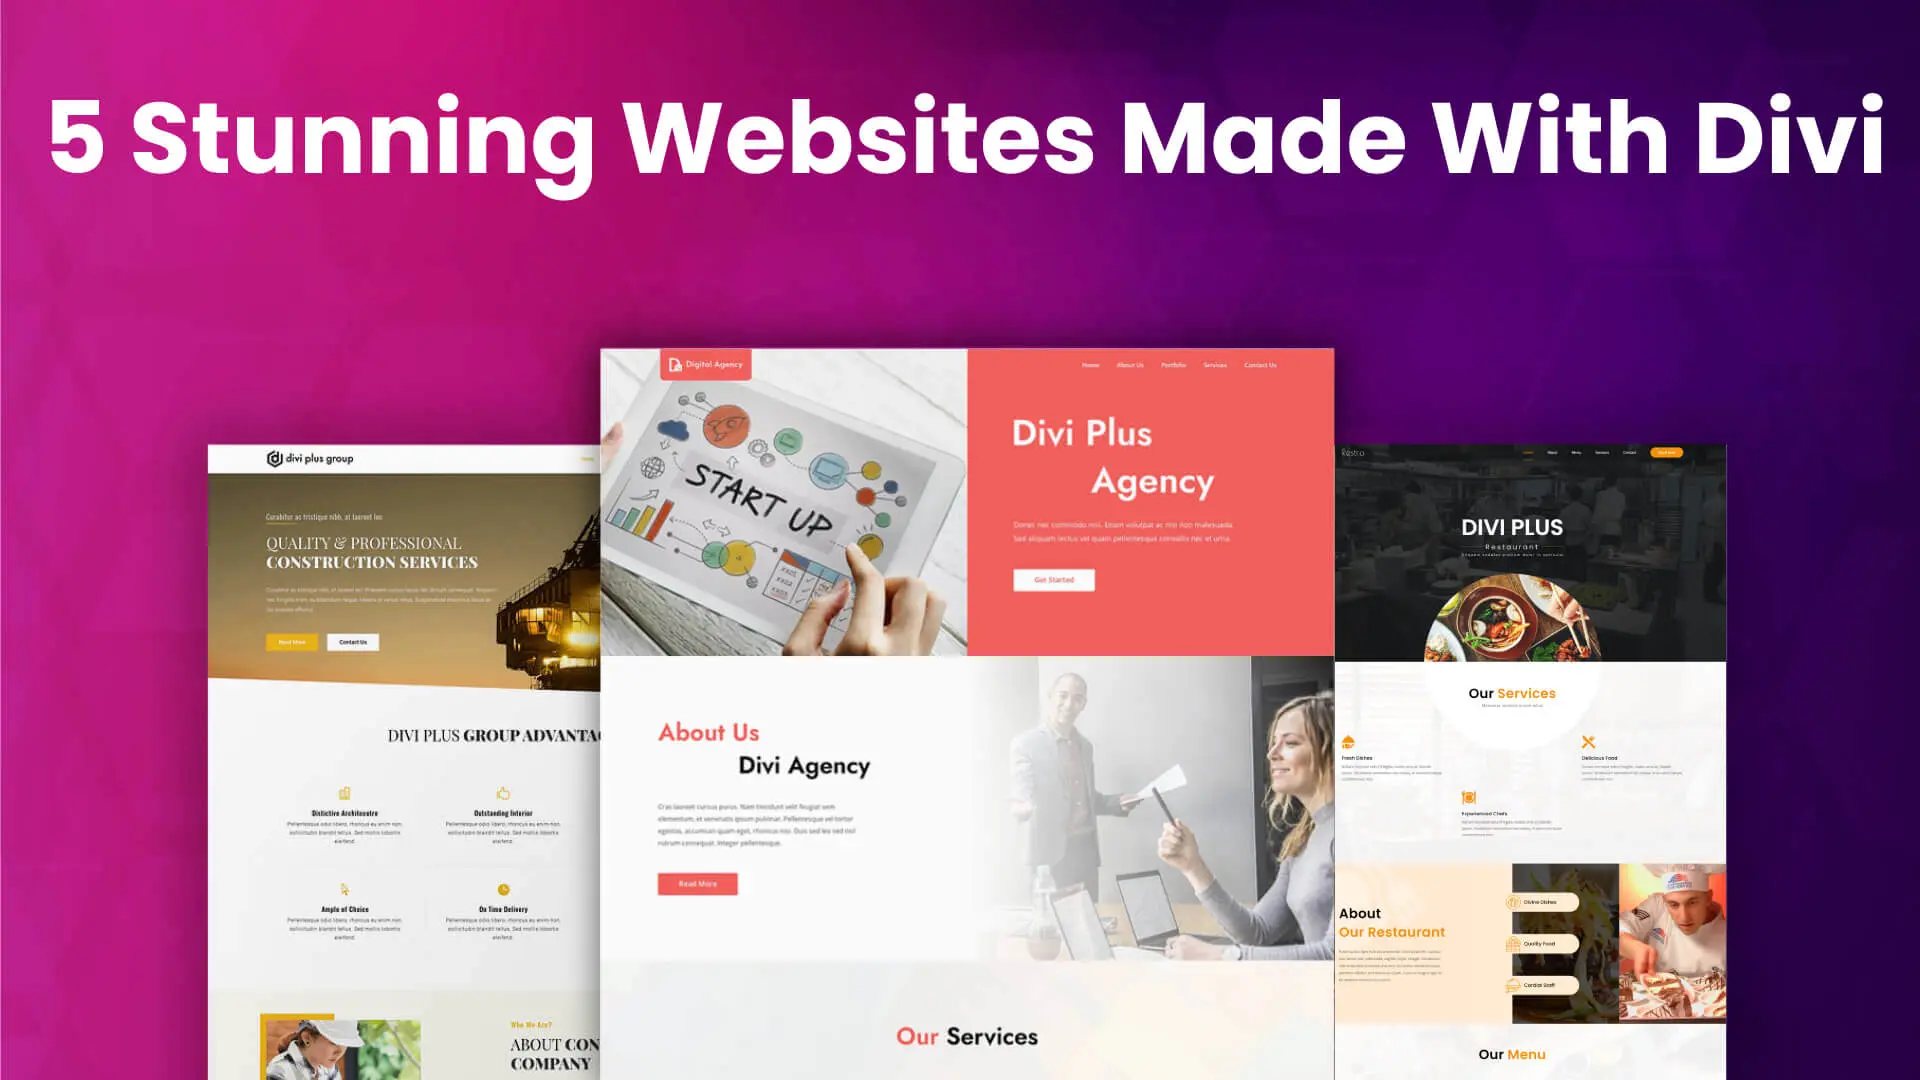 Websites made with Divi